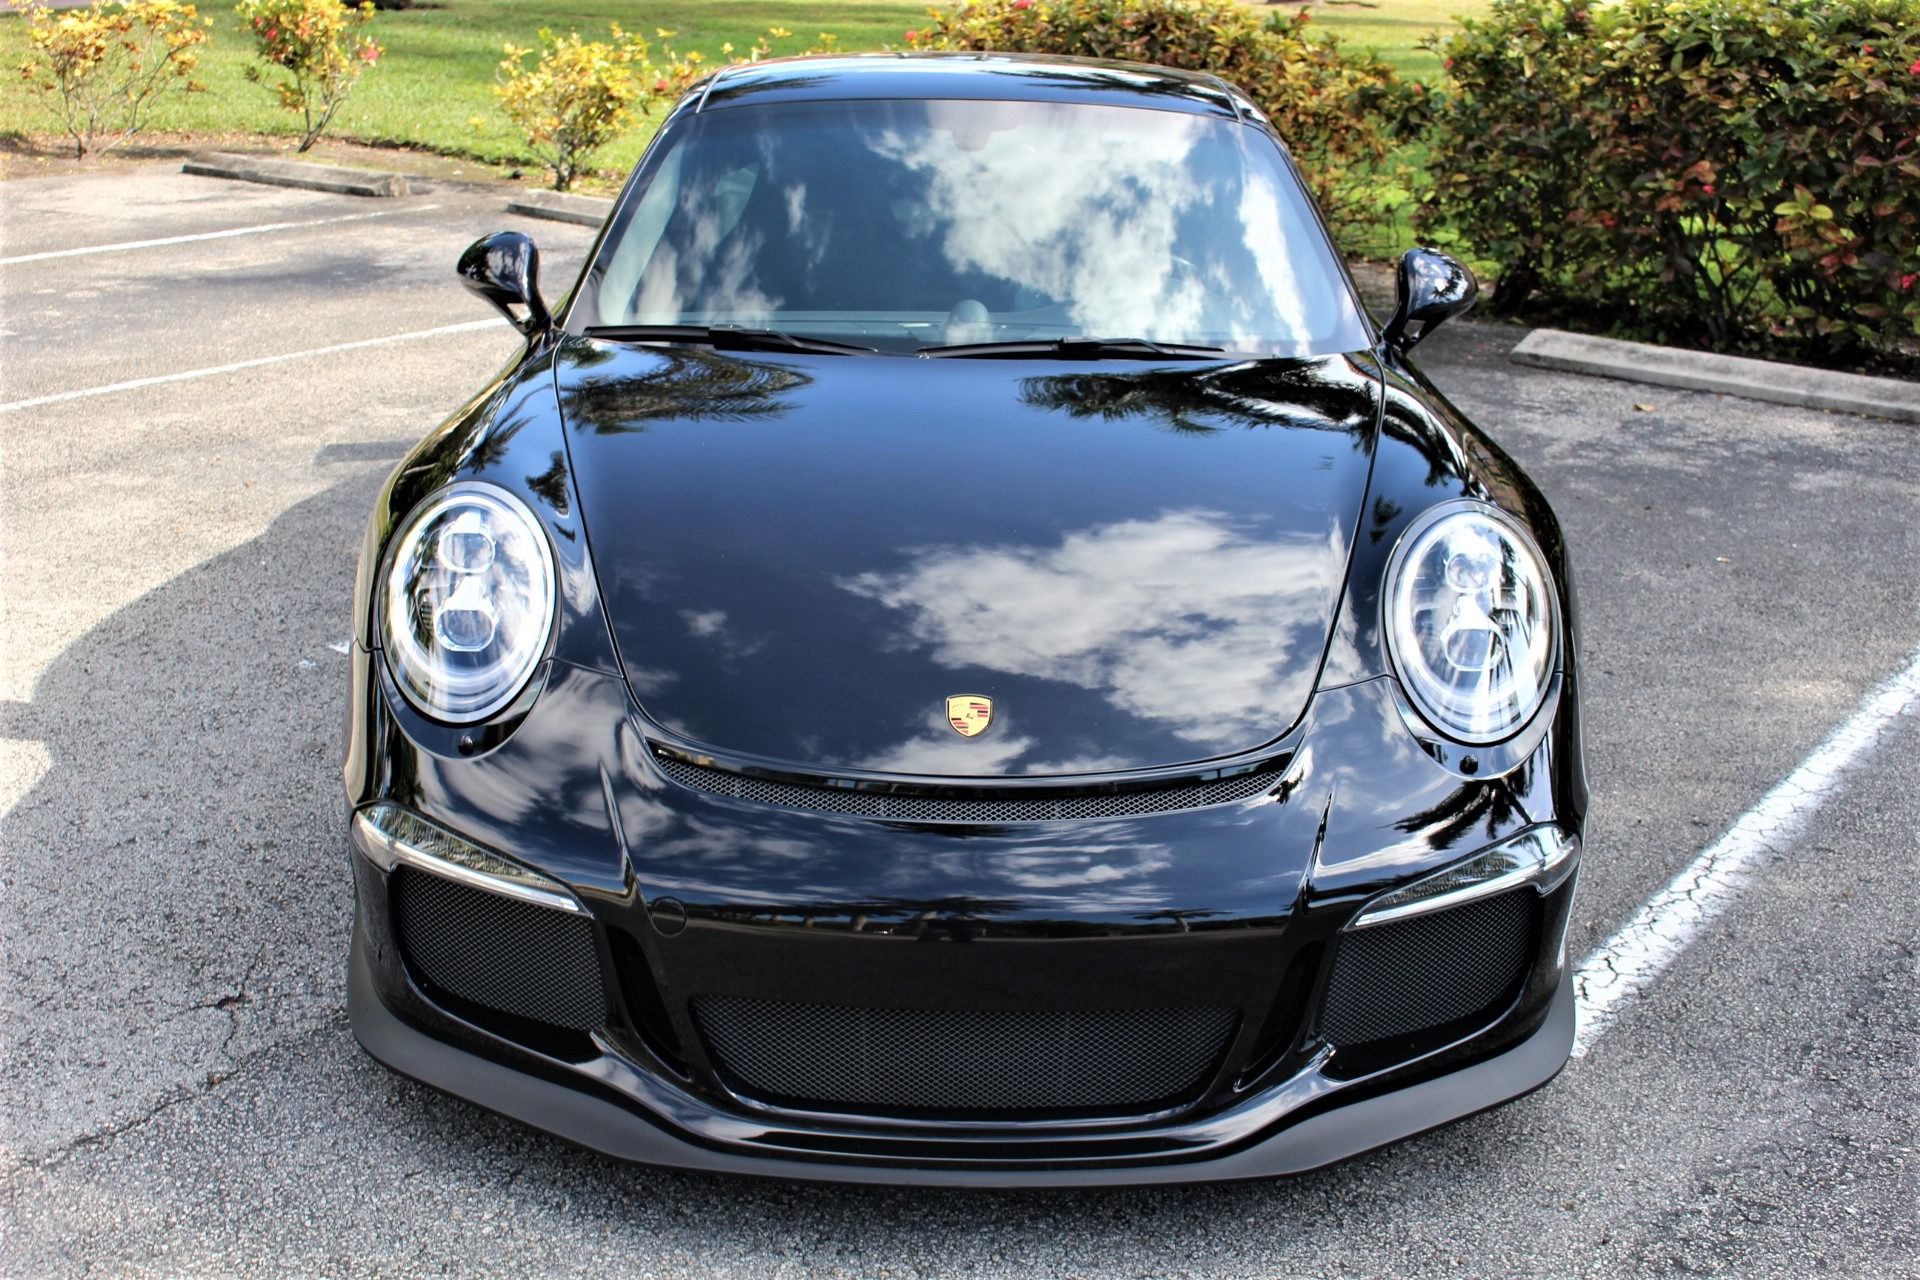 Used 2015 Porsche 911 GT3 for sale Sold at The Gables Sports Cars in Miami FL 33146 3